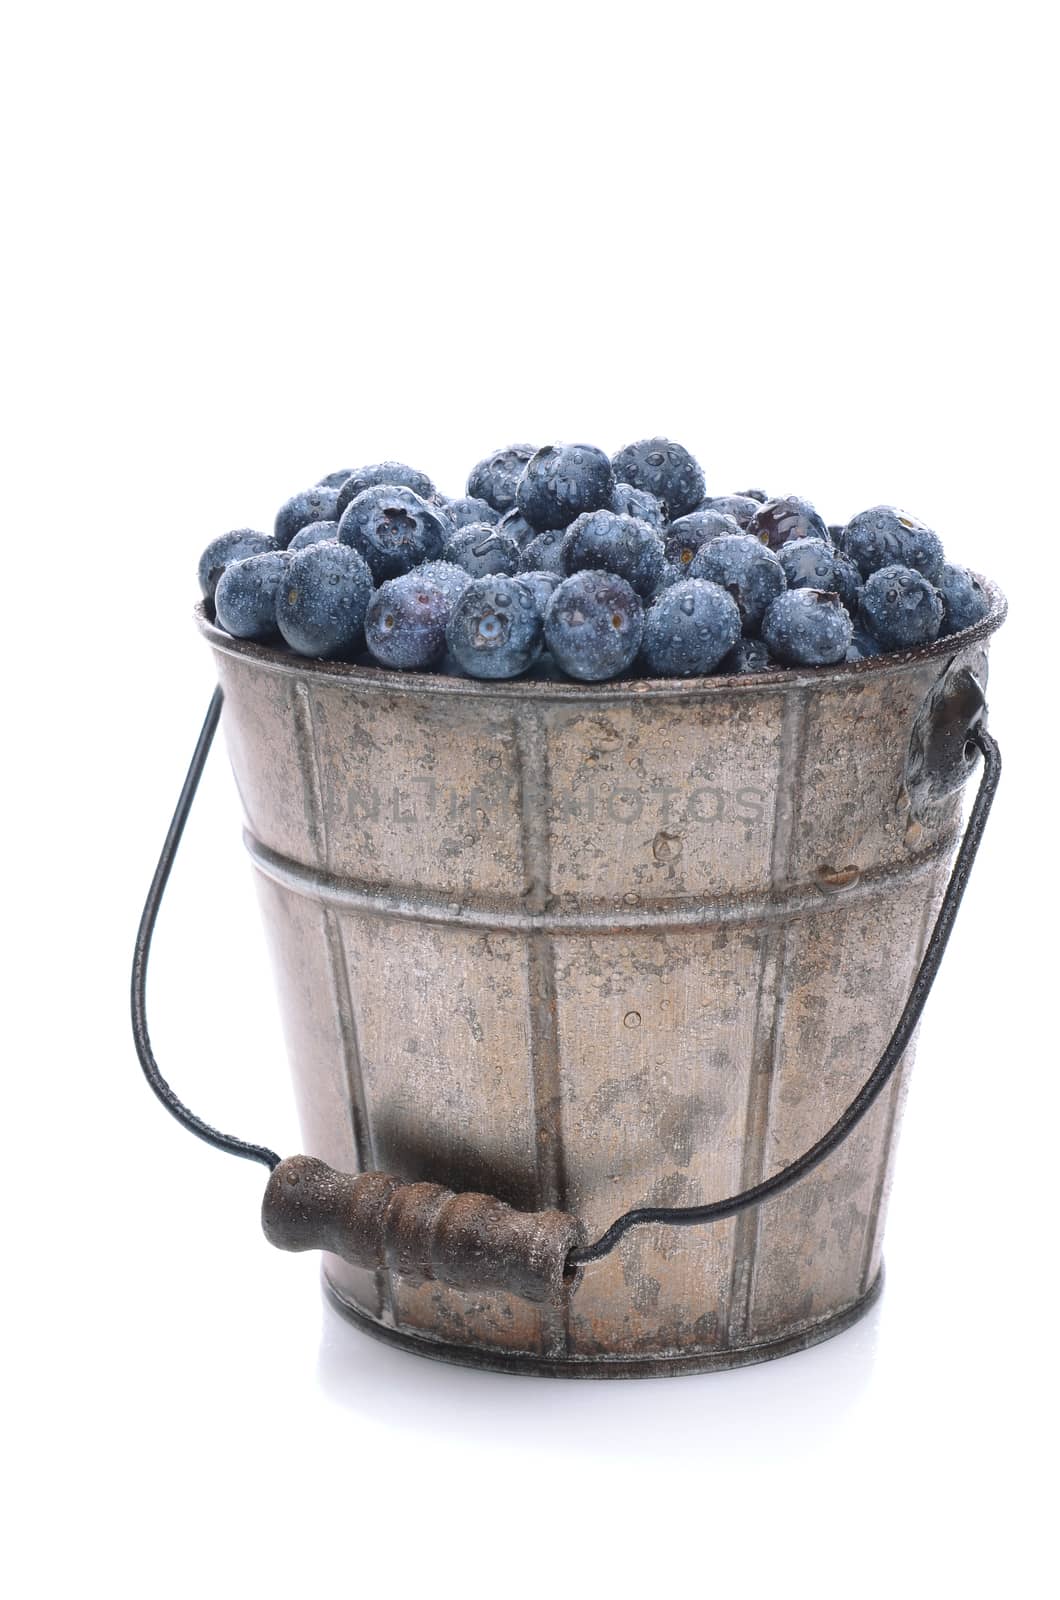 Pail of Fresh Picked Blueberries by sCukrov